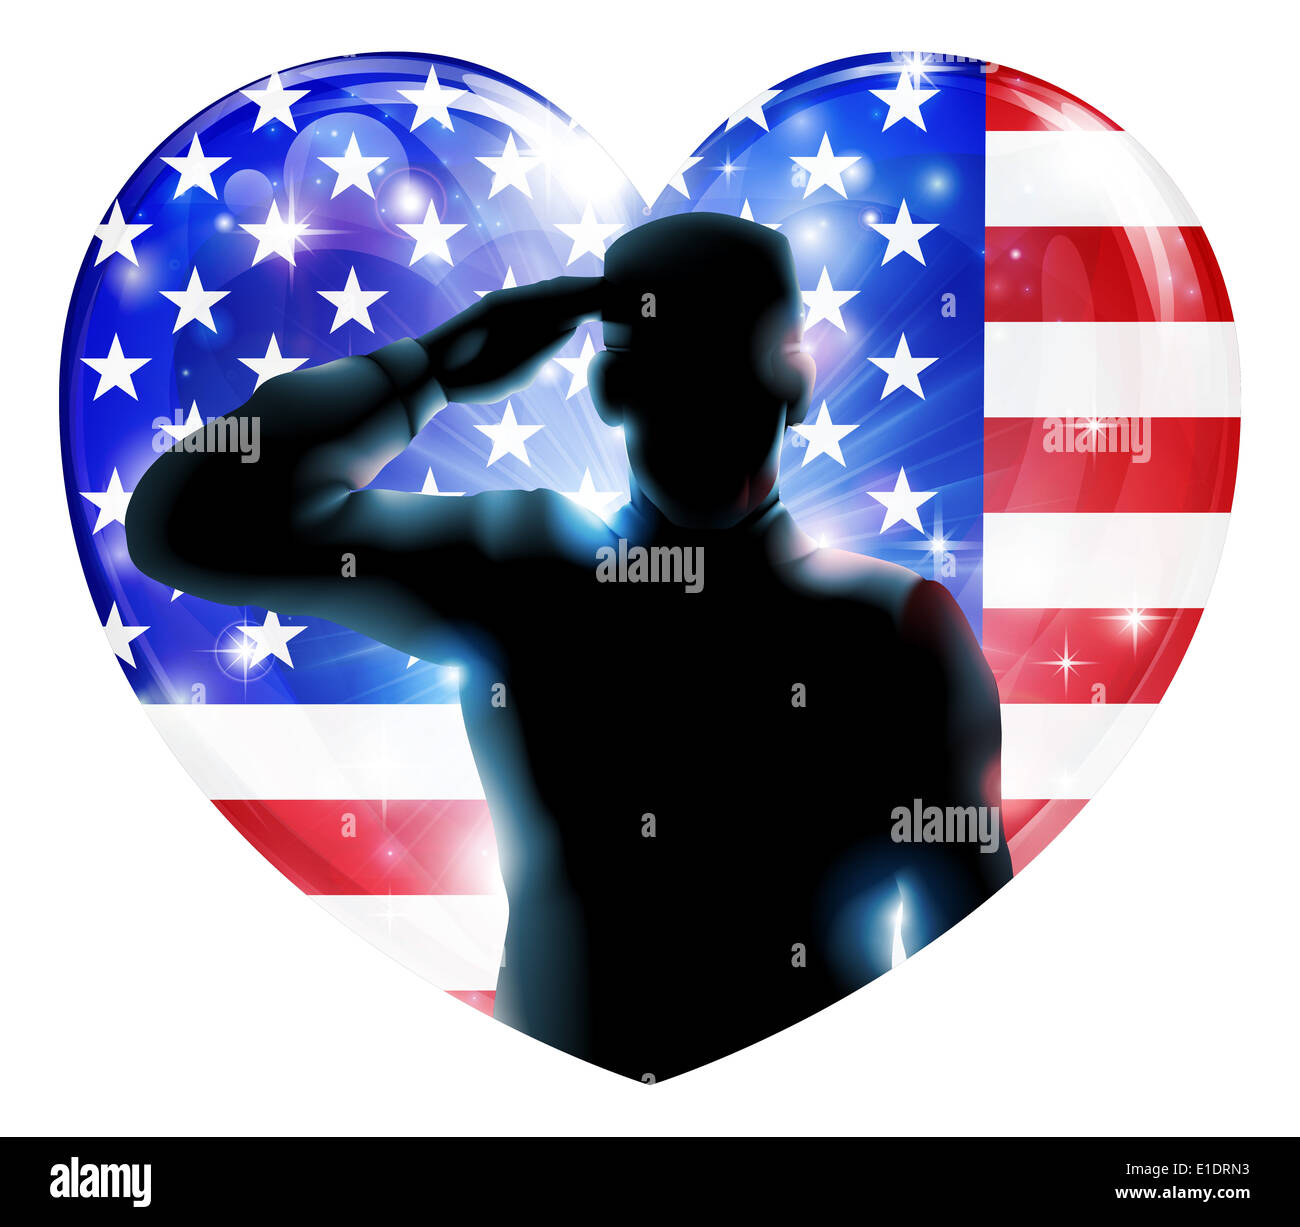 Illustration for 4th July Independence Day or veterans day of a soldier saluting in front of American flag shaped as a heart Stock Photo